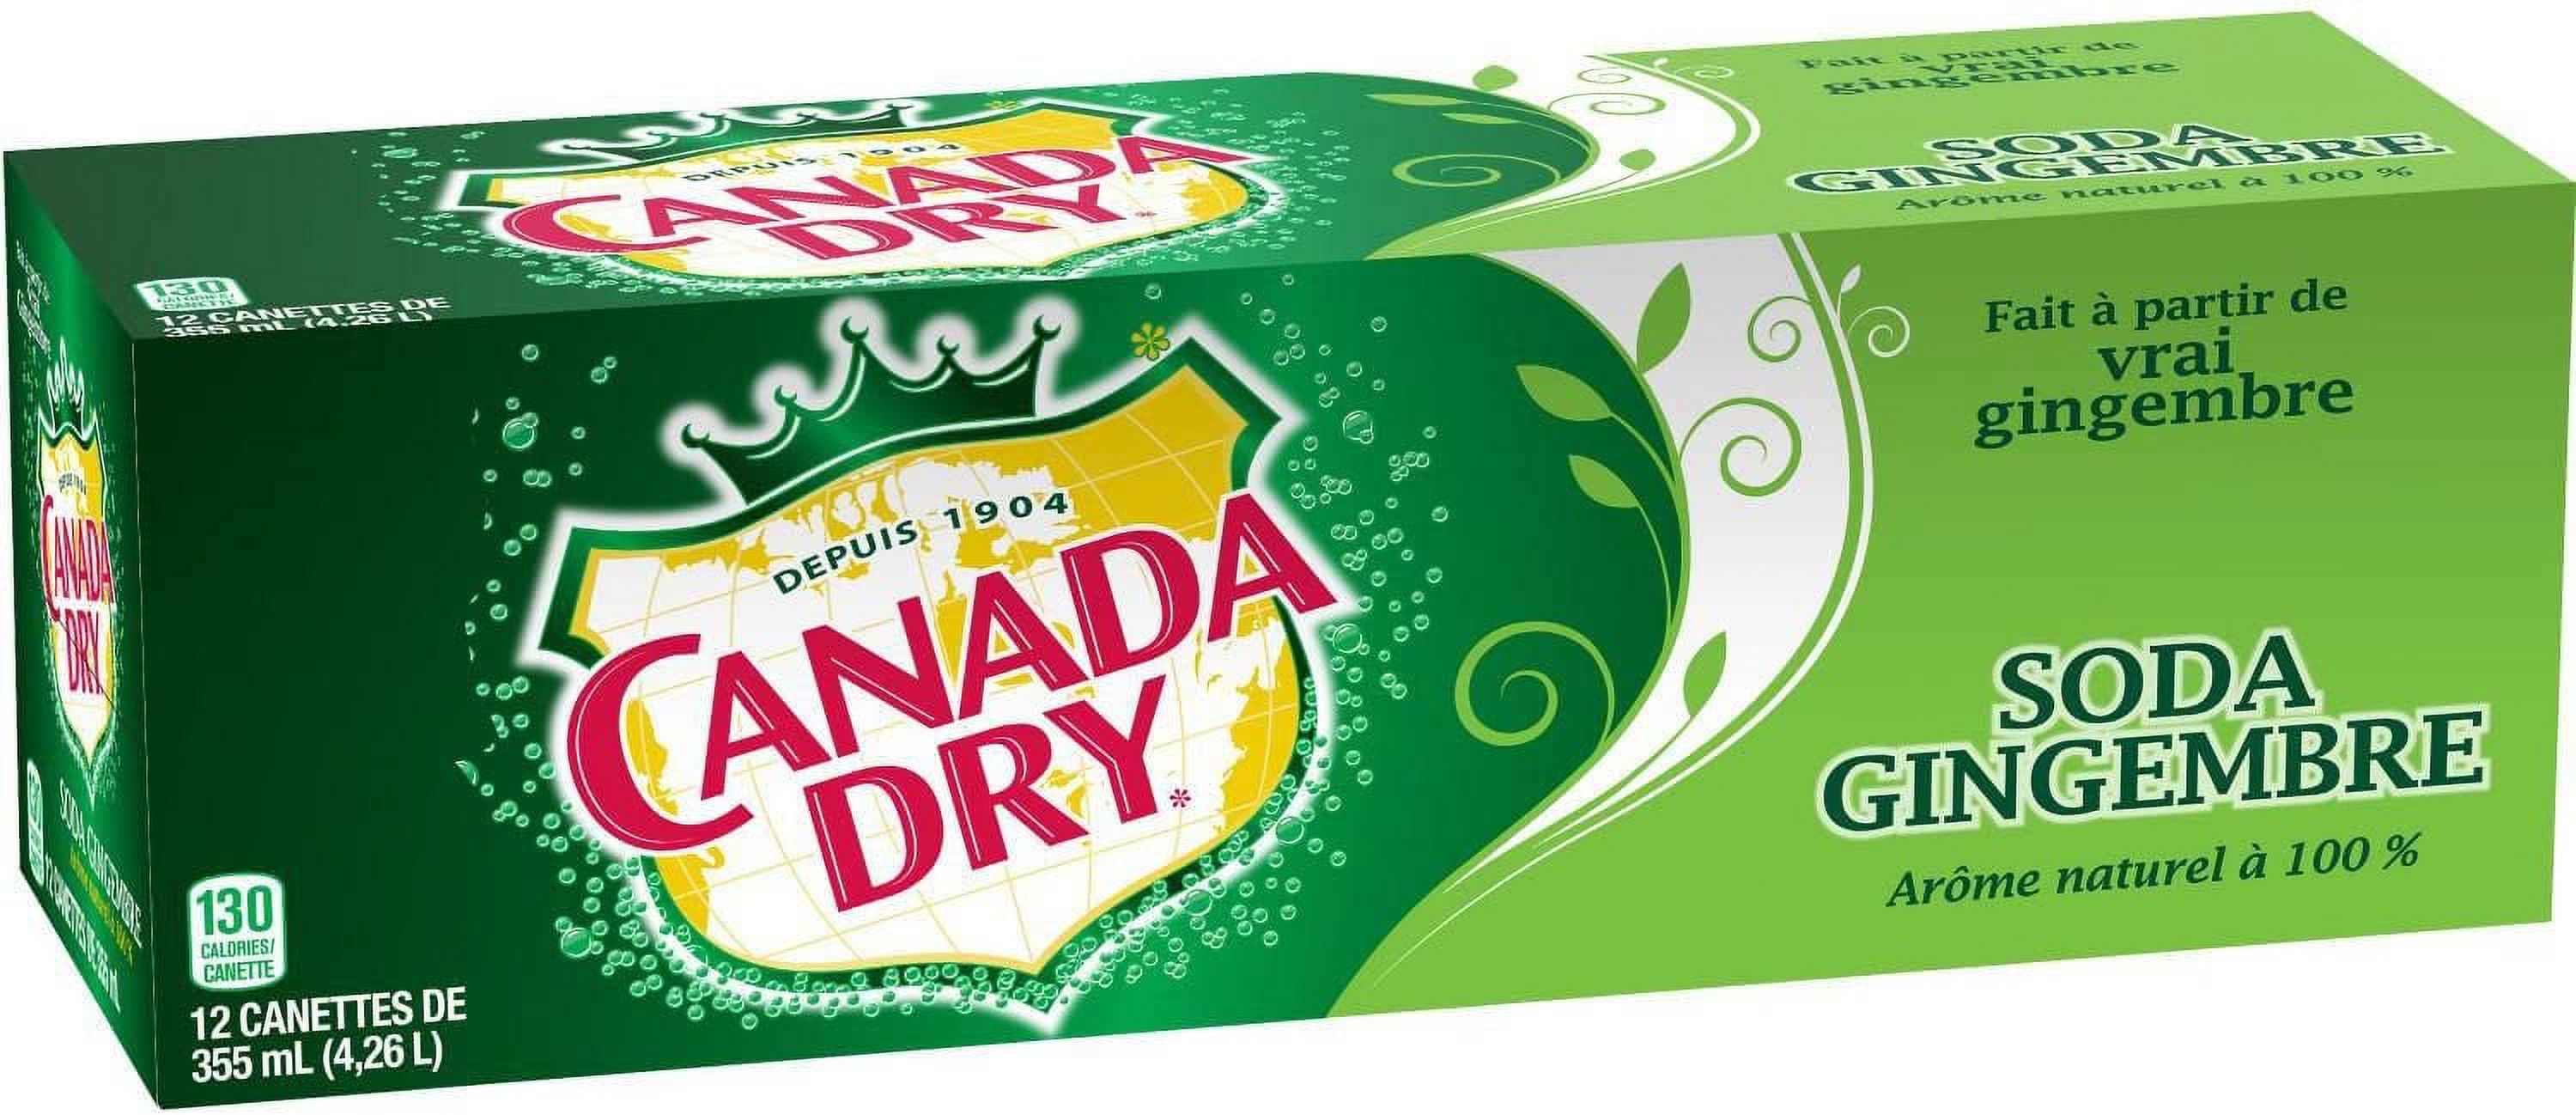 Canada Dry Ginger Ale Fridge Pack Cans, 355 mL, 3 Pack - image 4 of 11